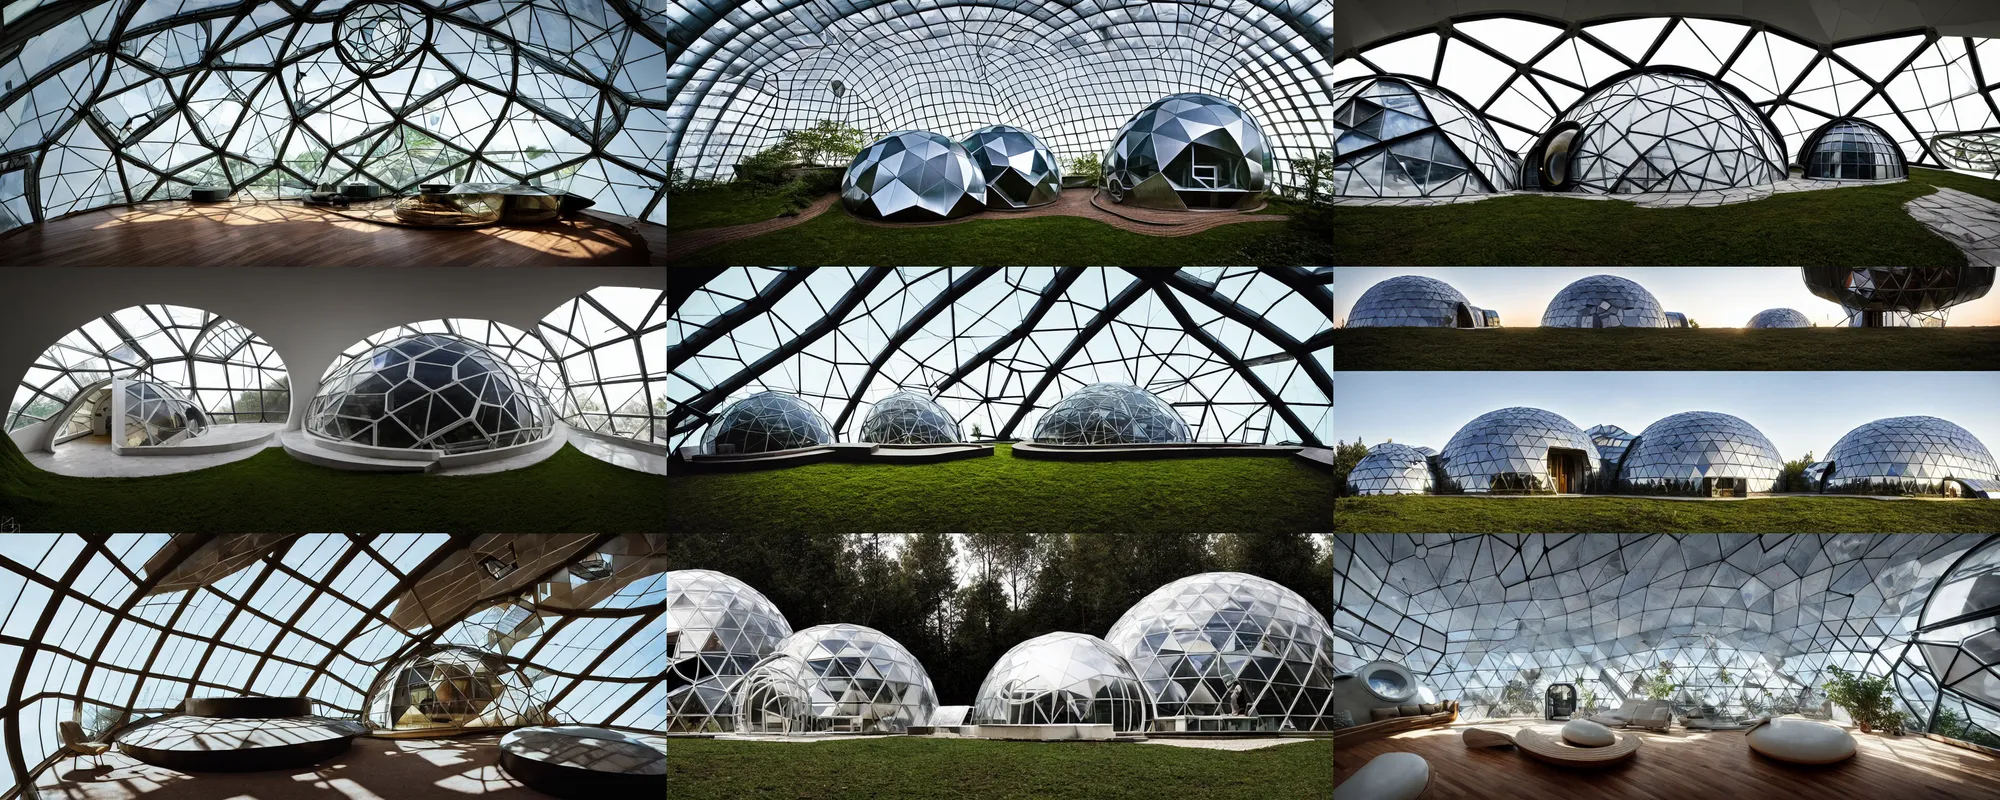 Prompt: dome house by kristoffer tejlgaard, syd mead, buckminster fuller, zaha hadid, concept house, earthship, parametric, maths, underground, optimus sun orientation in north hemisphere, geodesic architecture, biodome, domespace